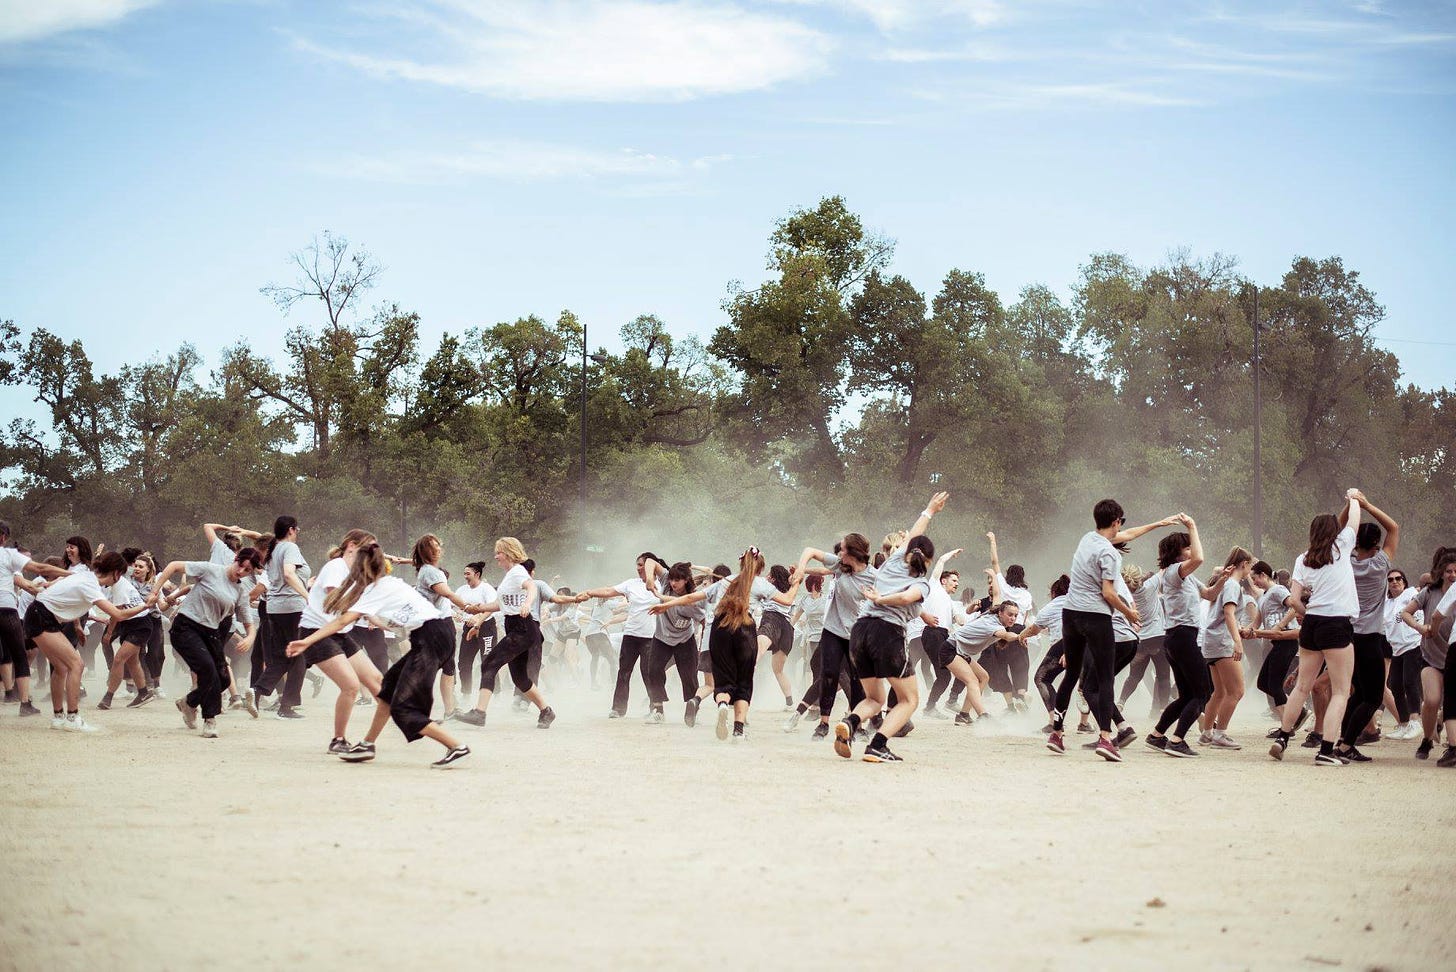 A group of dancers spin on gravel at Birrarung Marr. The dancers wear black pants, white or grey t-shirts, and runners. Dust rises from the gravel and there are gum trees in the background.